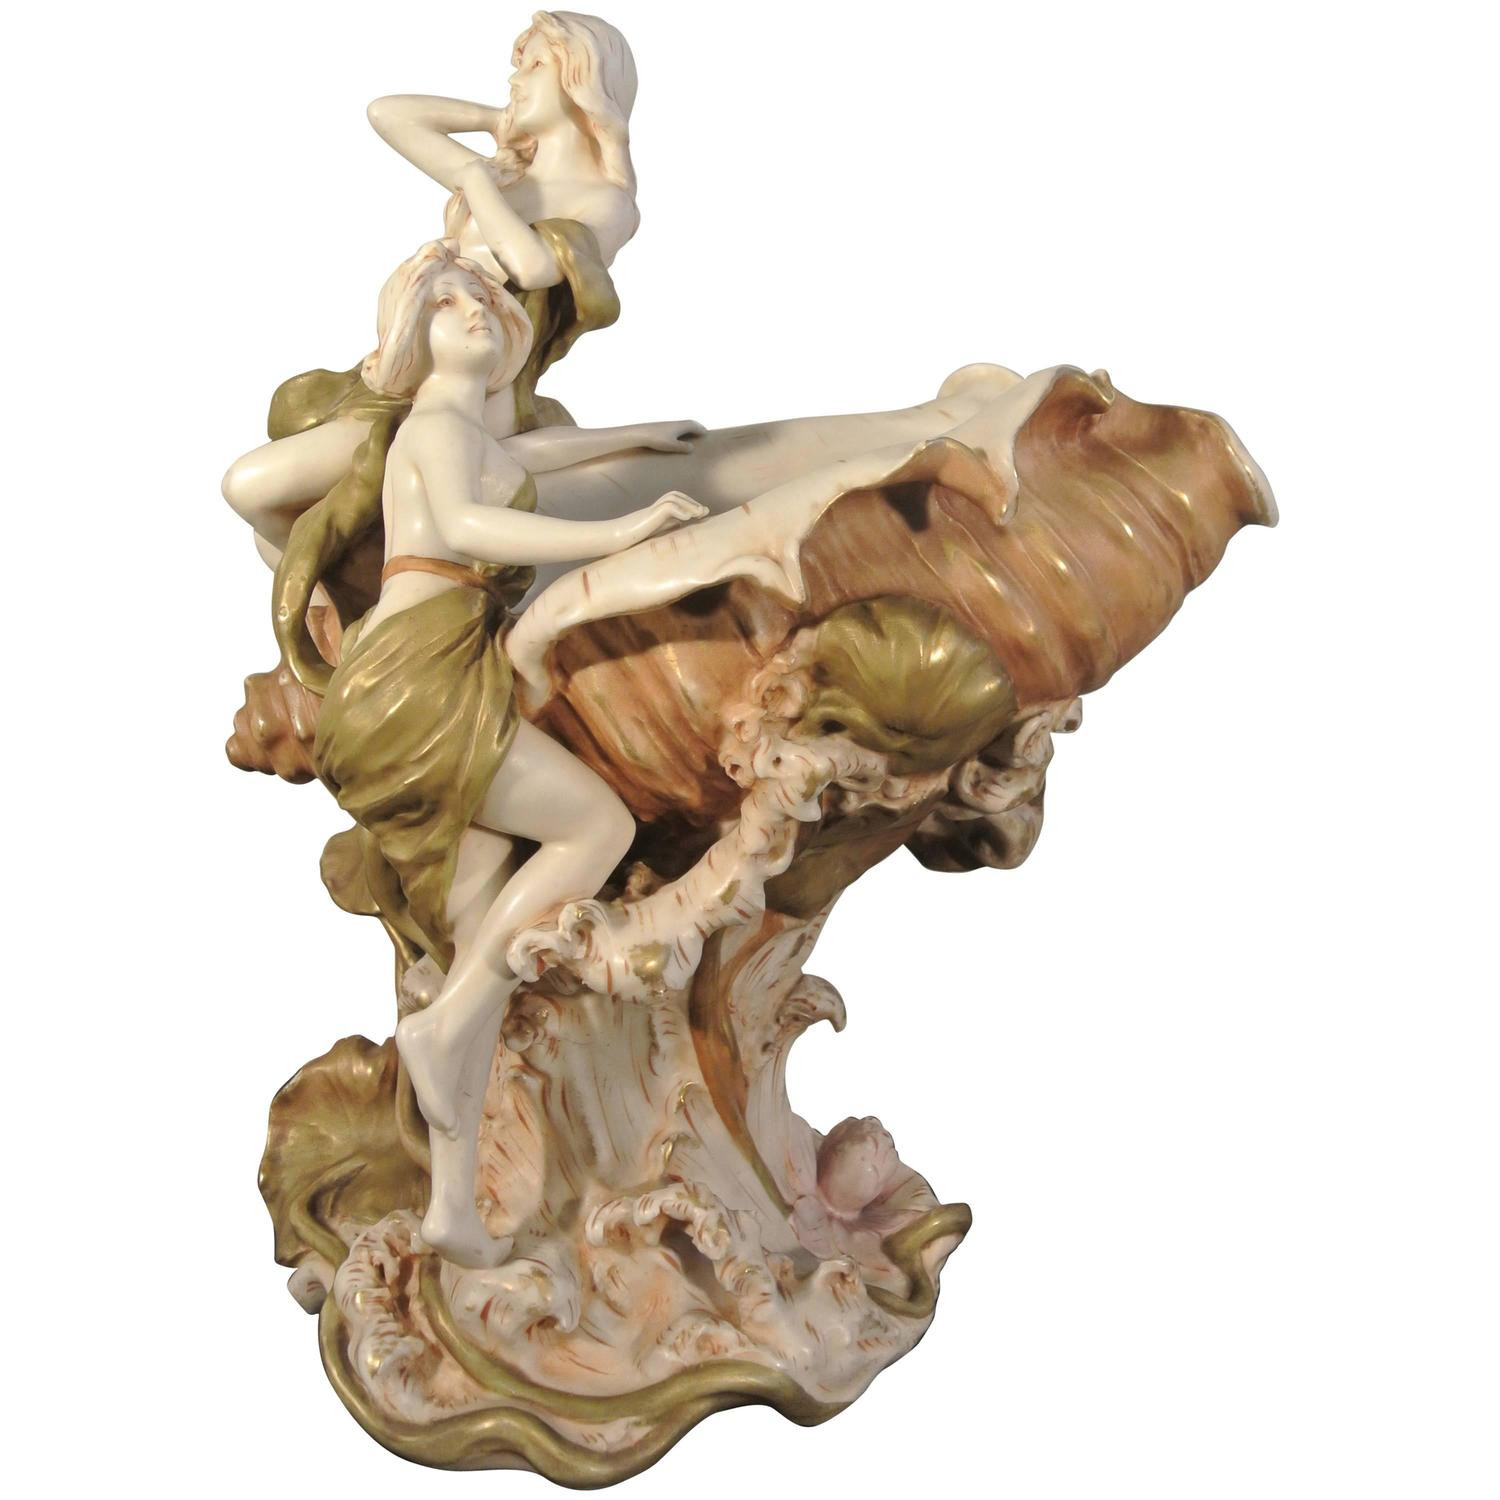 royal dux vase of royal dux porcelain centrepiece art nouveau 2 women on conch shell throughout royal dux porcelain centrepiece art nouveau 2 women on conch shell circa 1900 for sale at 1stdibs